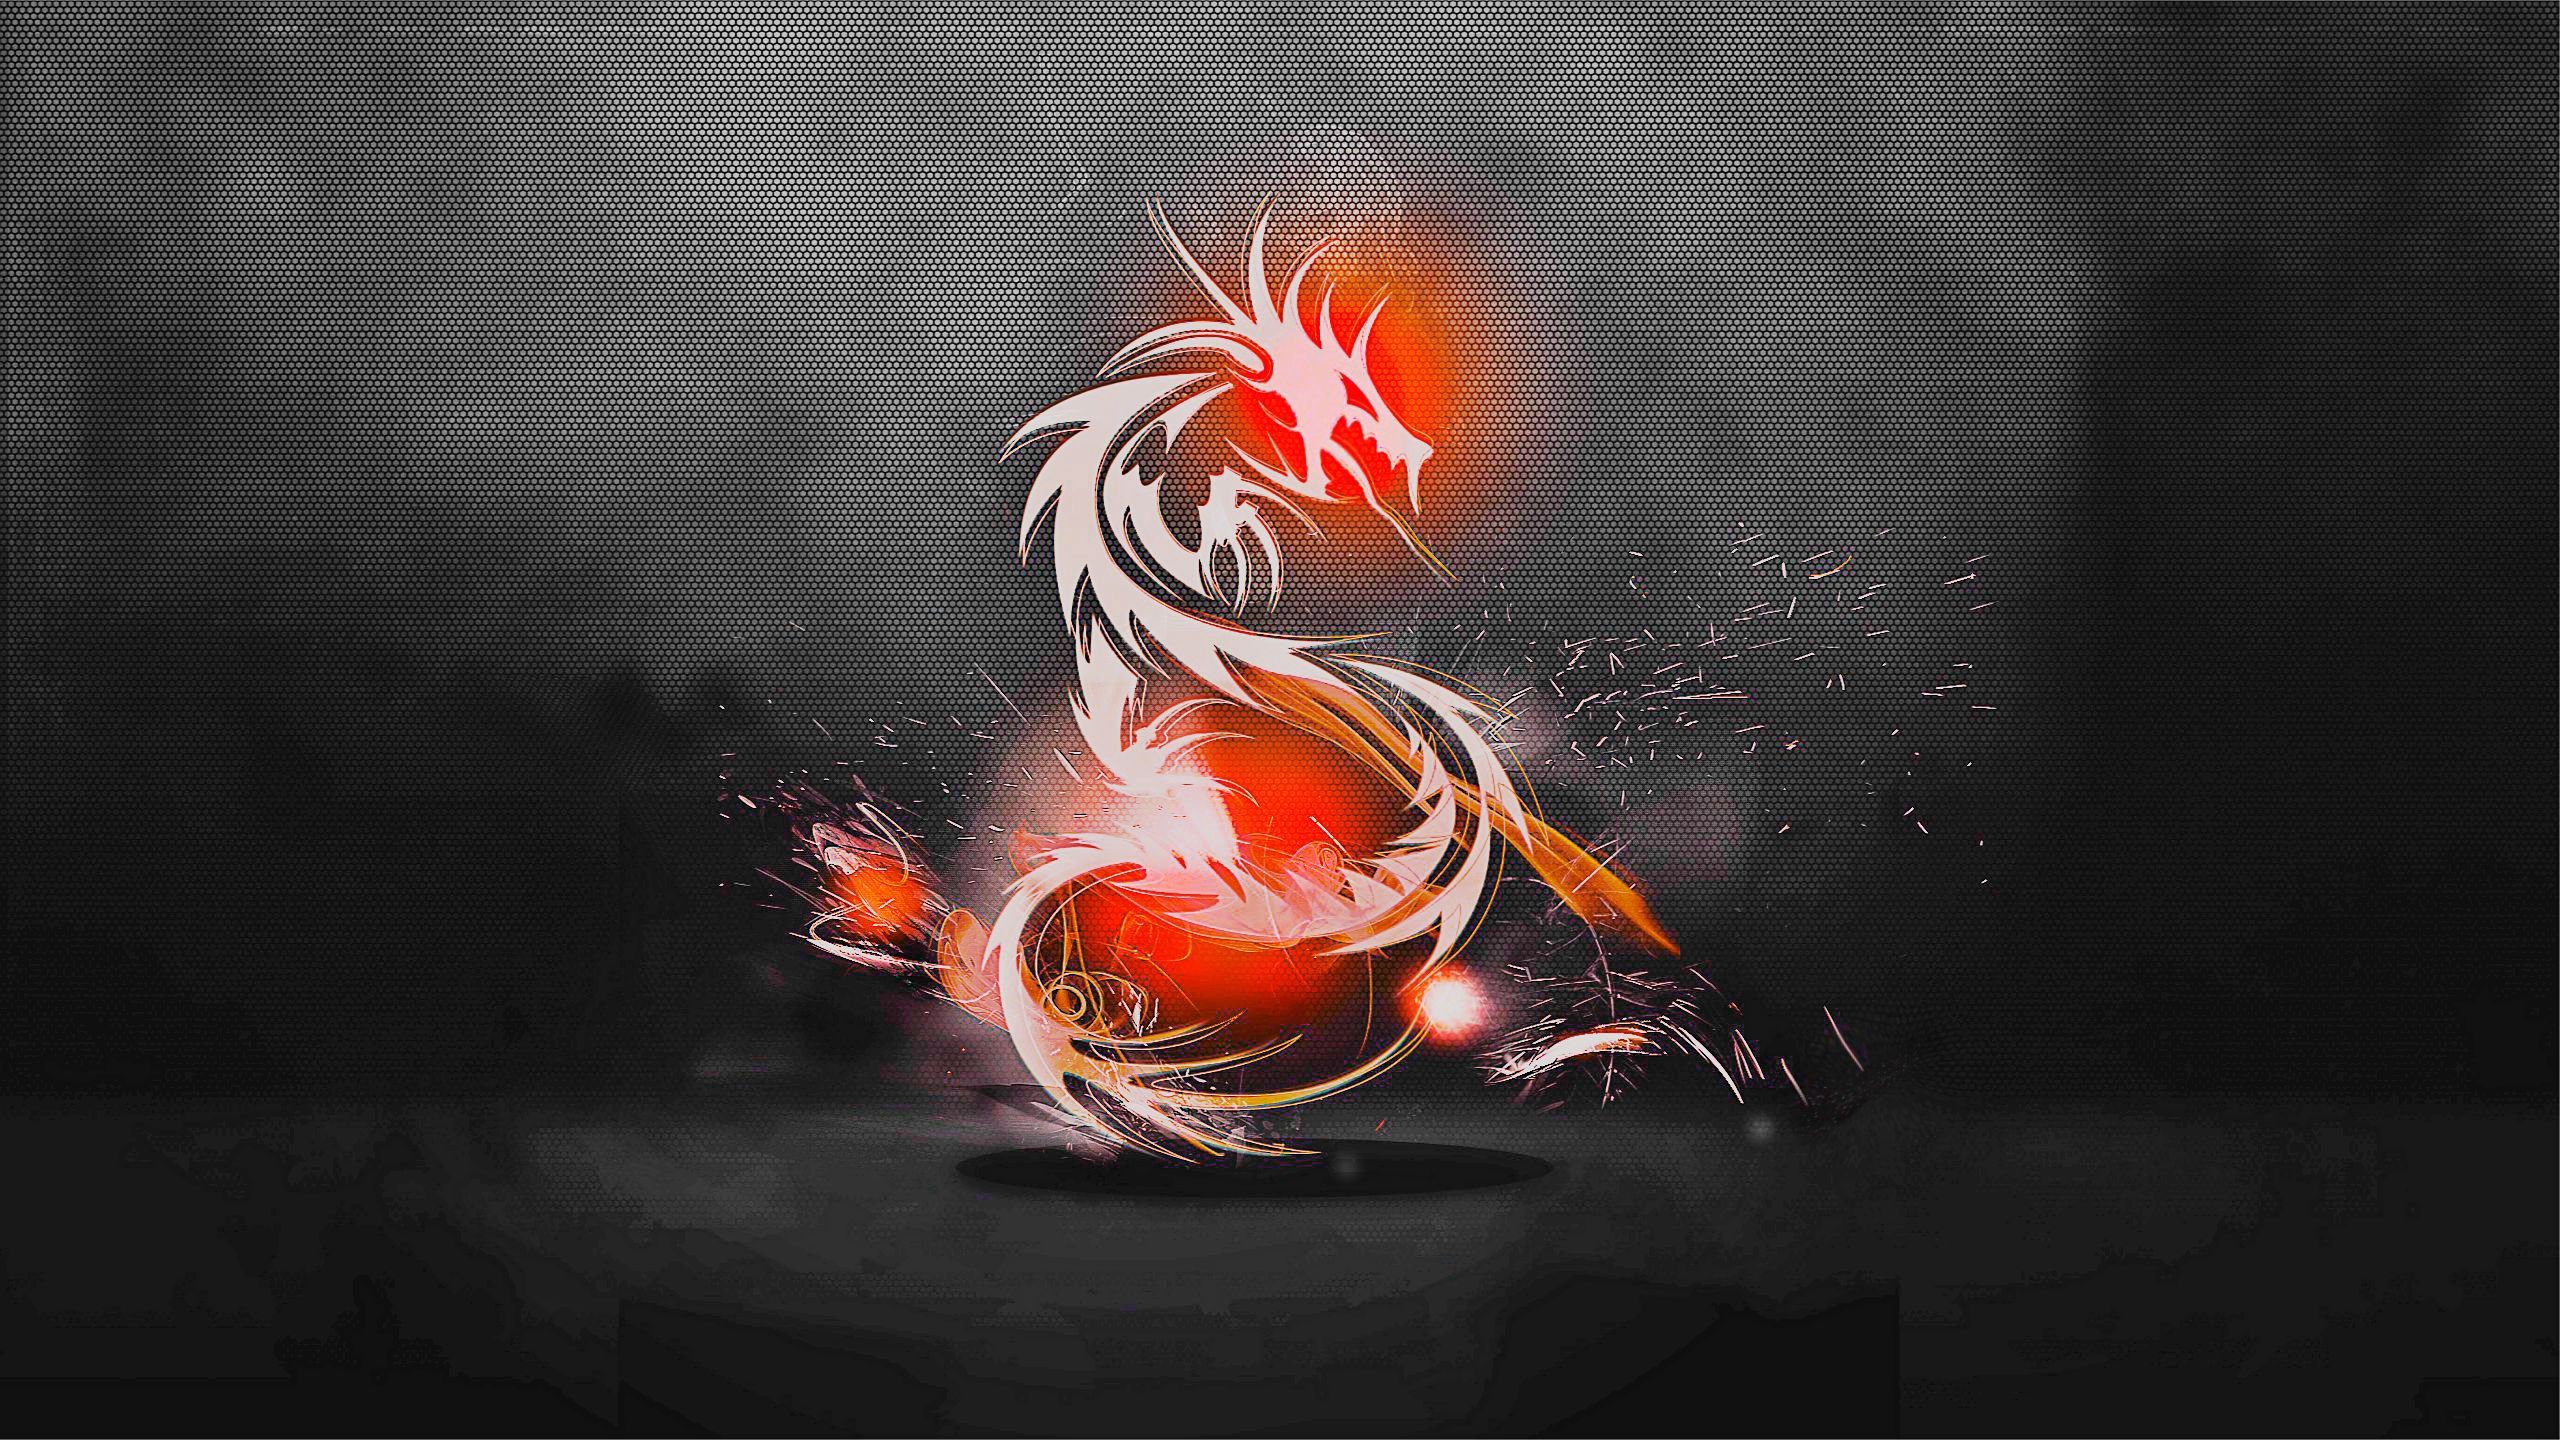 dragon, fire, abstract, background, shadow wallpaper for mobile